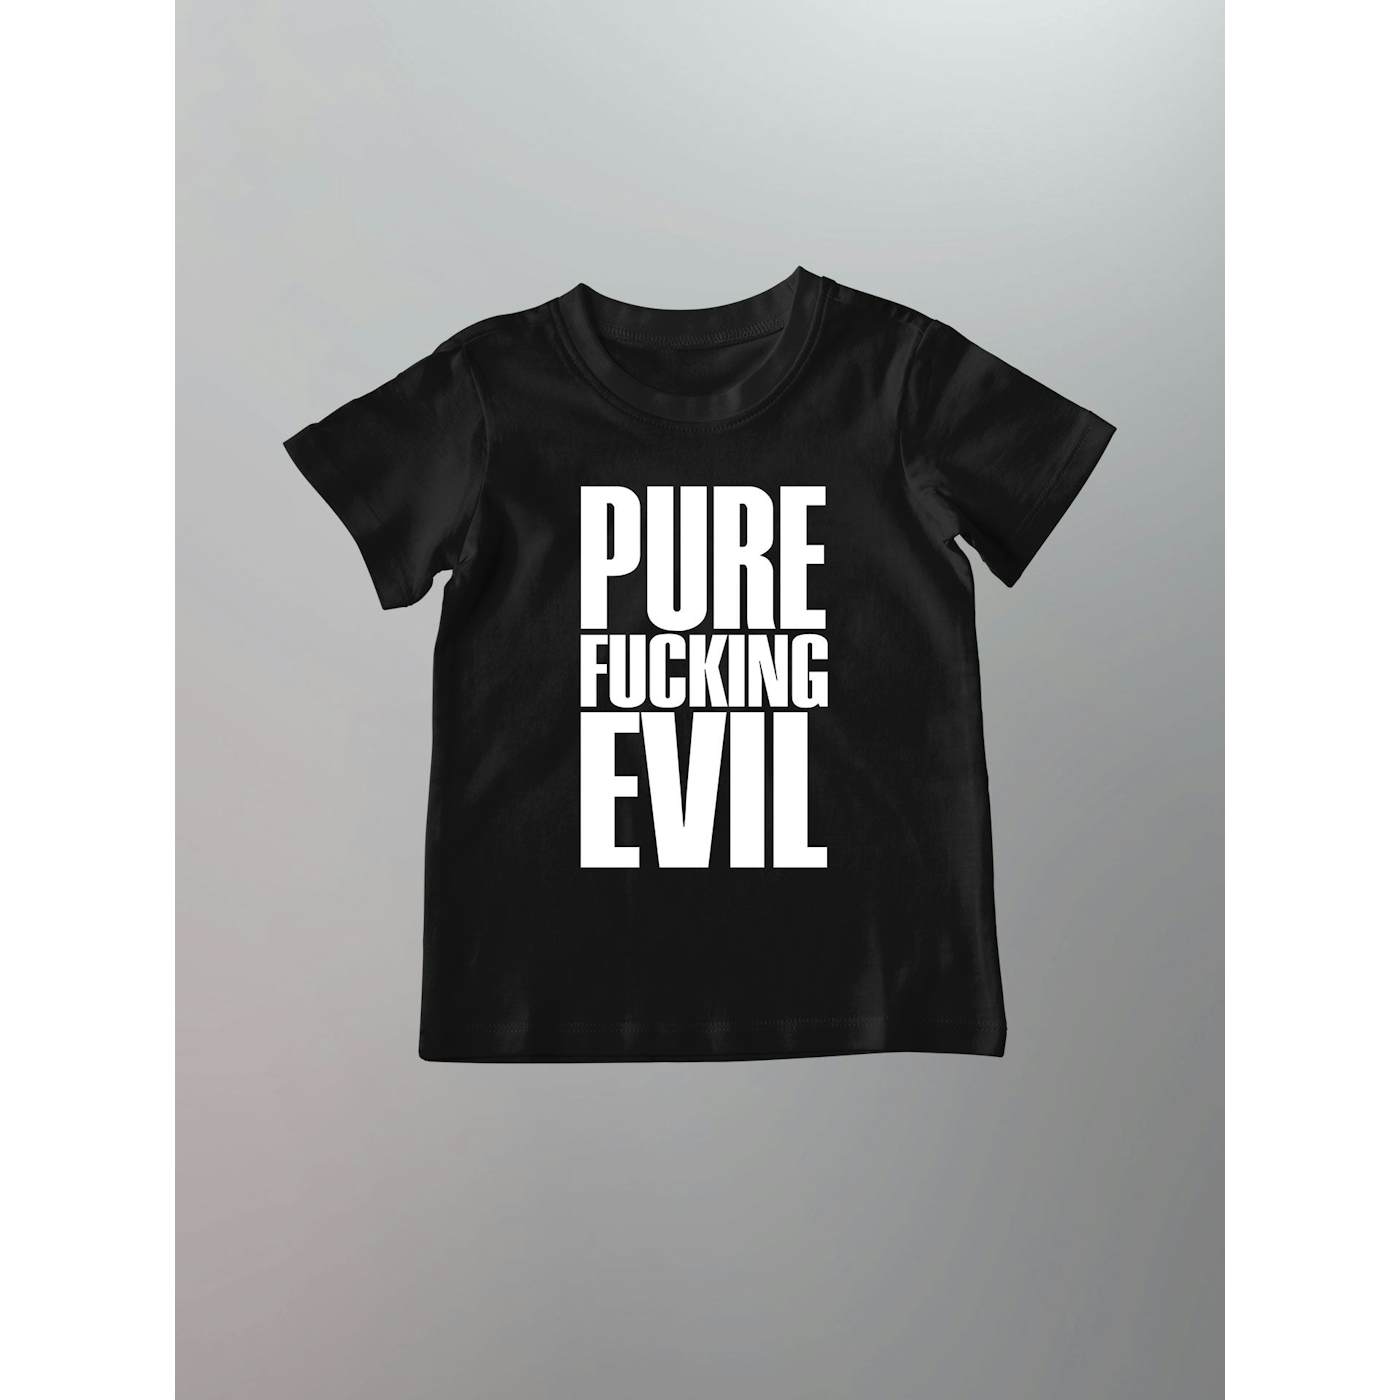 The Browning - Pure Evil Shirt [Toddler/Youth]